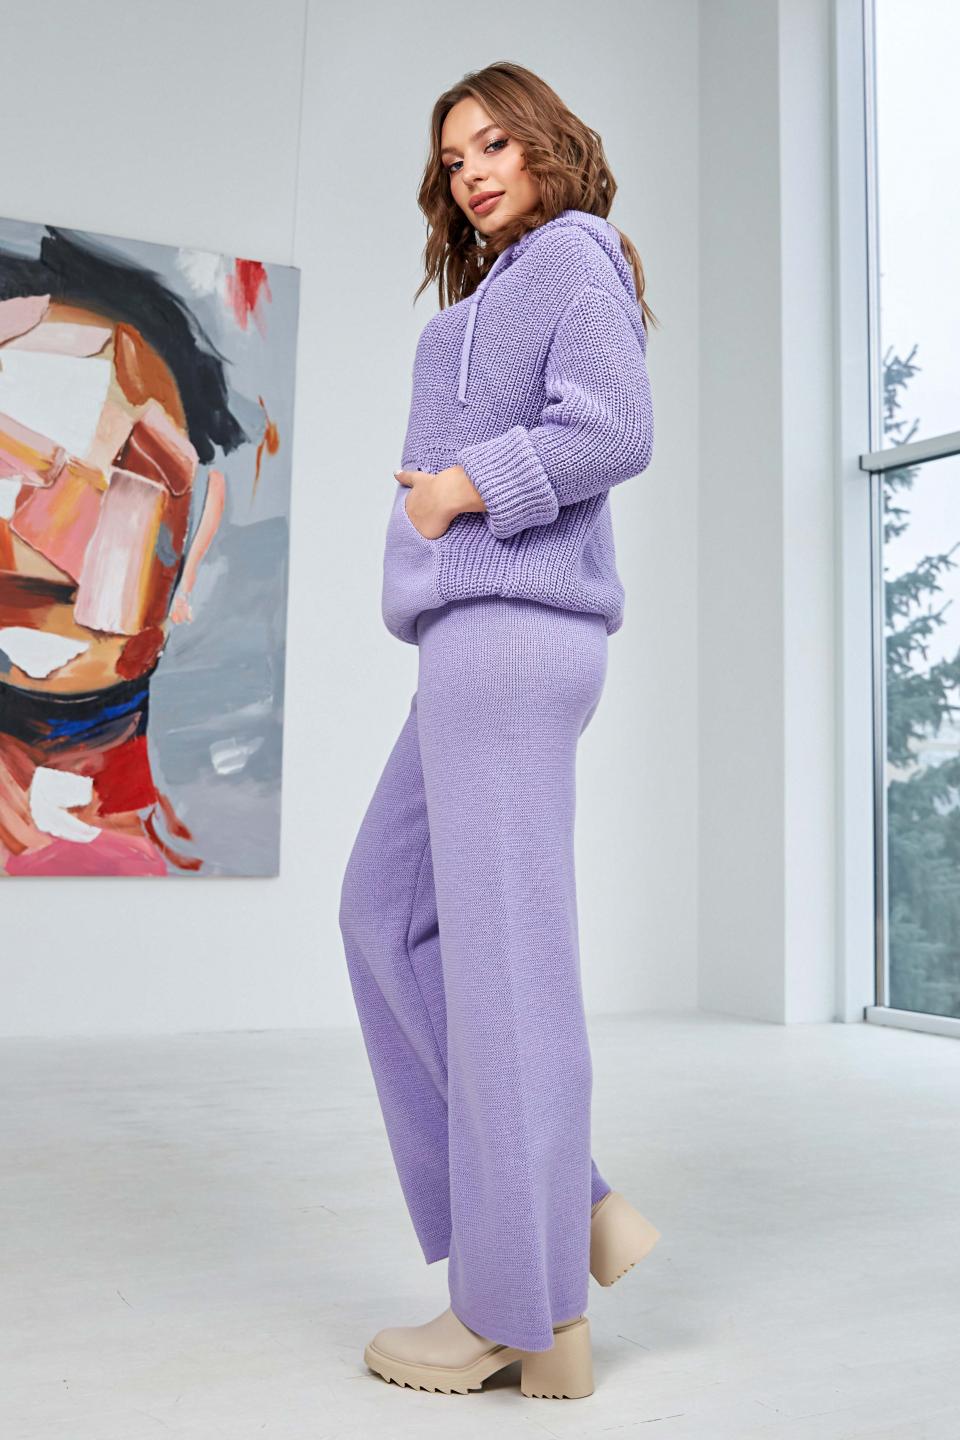 Warm suit: sweater «Voyage» and pants (purple)